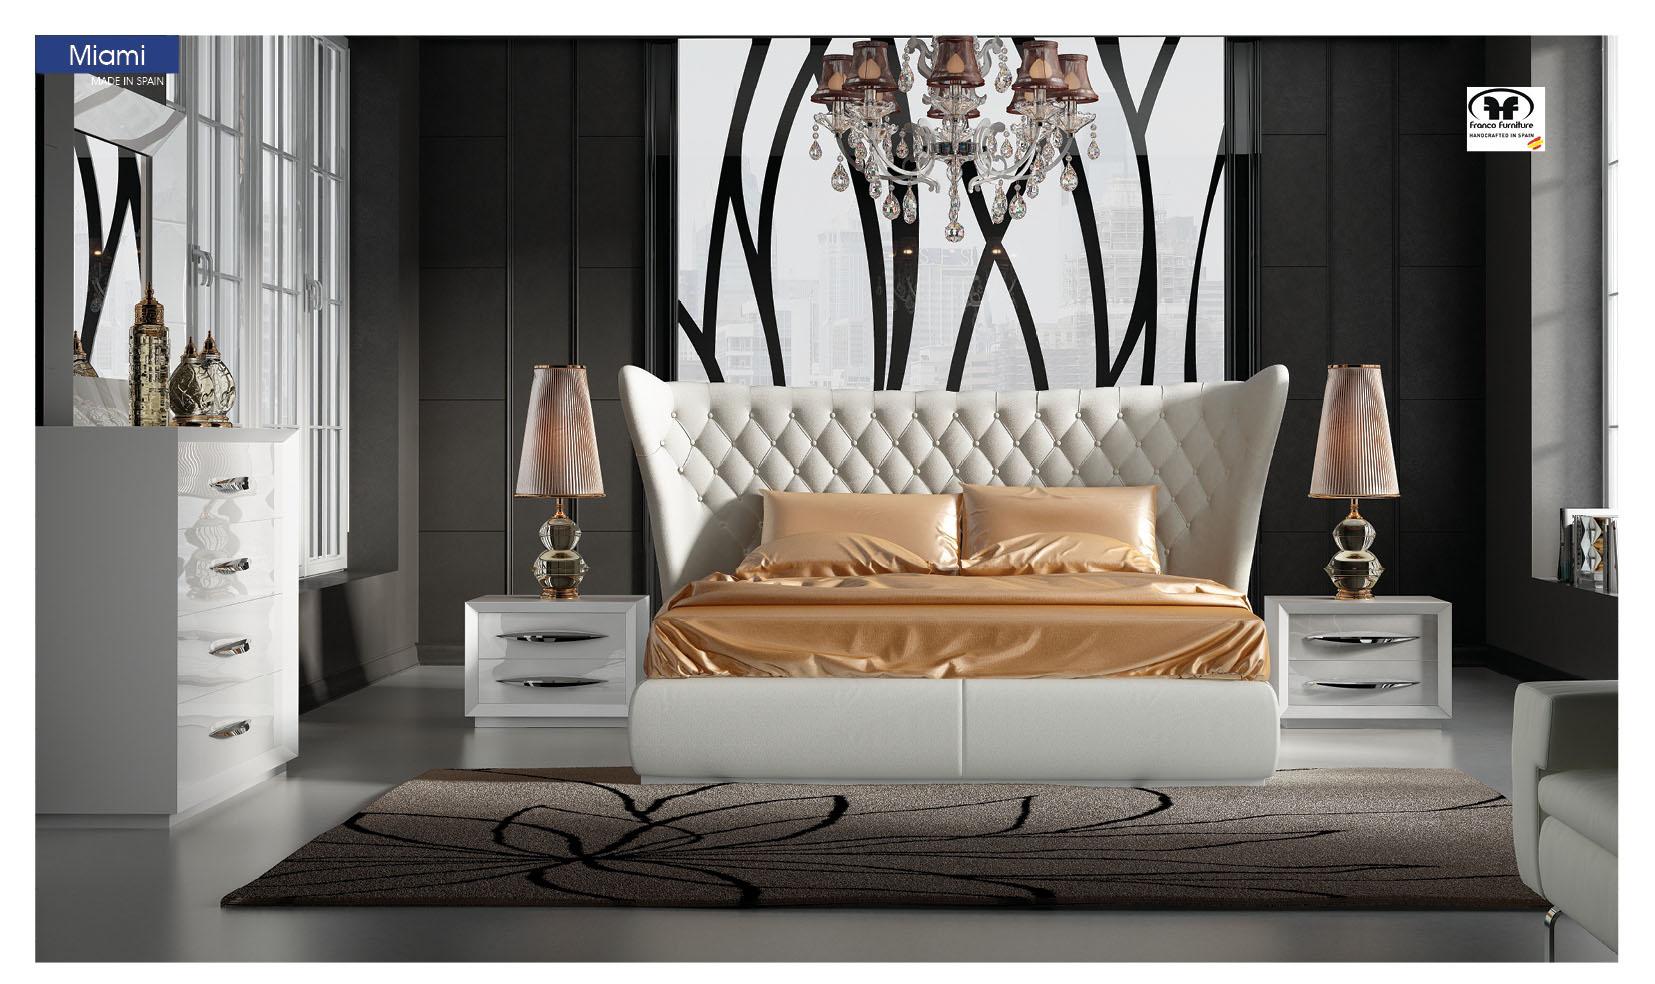 

    
ESF-Miami-Q-2N-3PC White Eco-Leather Queen Bedroom Set 3Pcs Modern Made in Spain ESF Miami / Carmen
